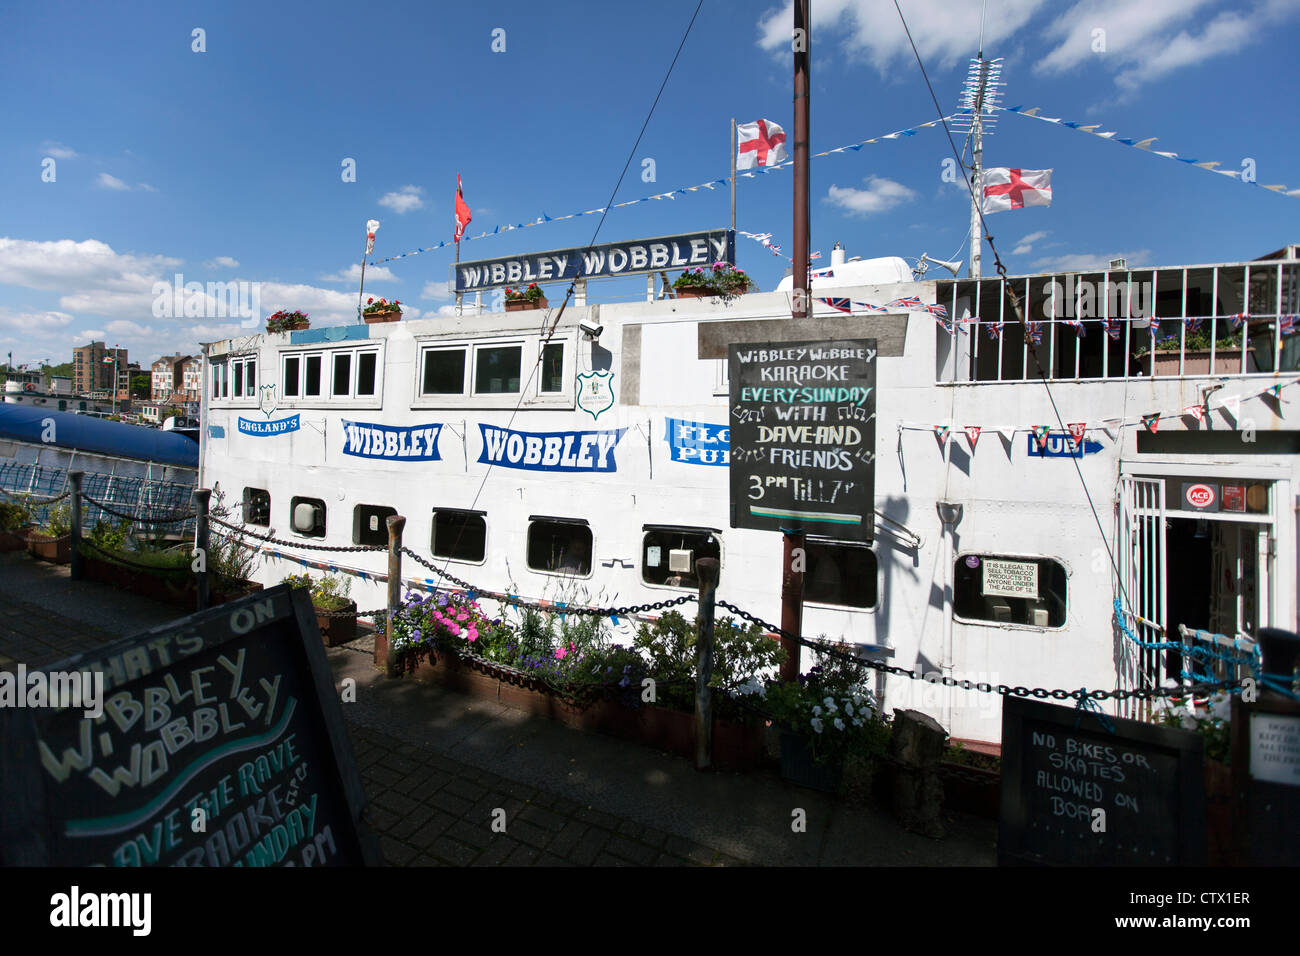 The Wibbley Wobbley Pub is a converted barge in Greenland Dock, Rotherhithe, London, England, UK. Stock Photo